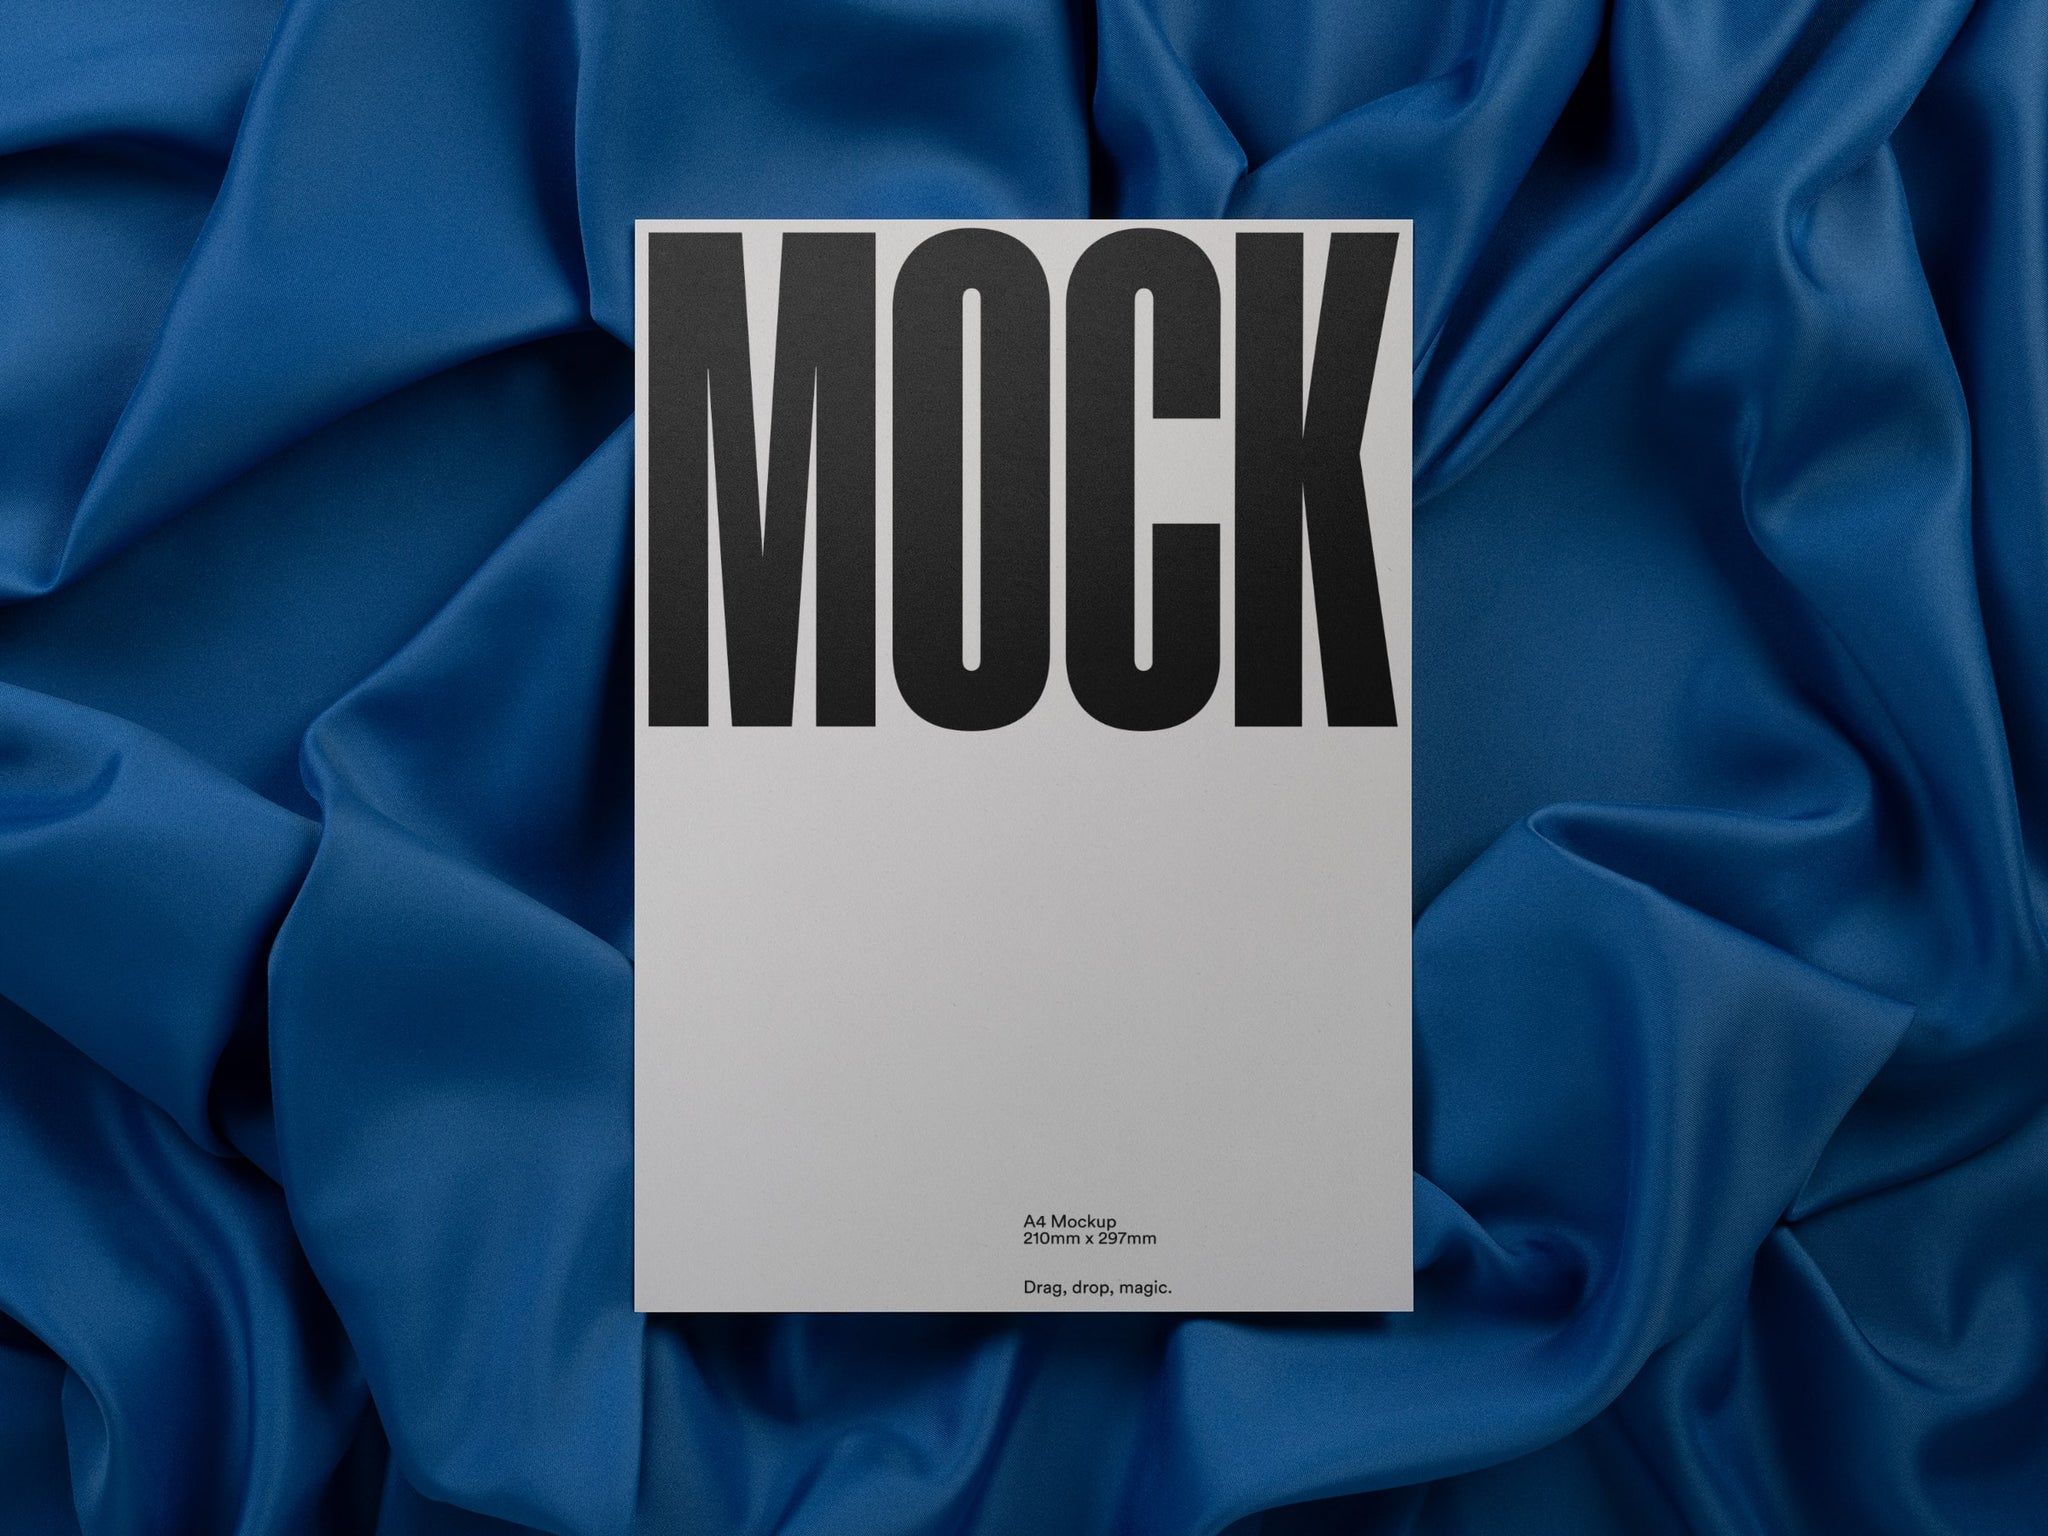 Branding mockup featuring stationery print items, showing a poster design on a blue background made of cloth fabric. Created by Sylvan Hillebrand.